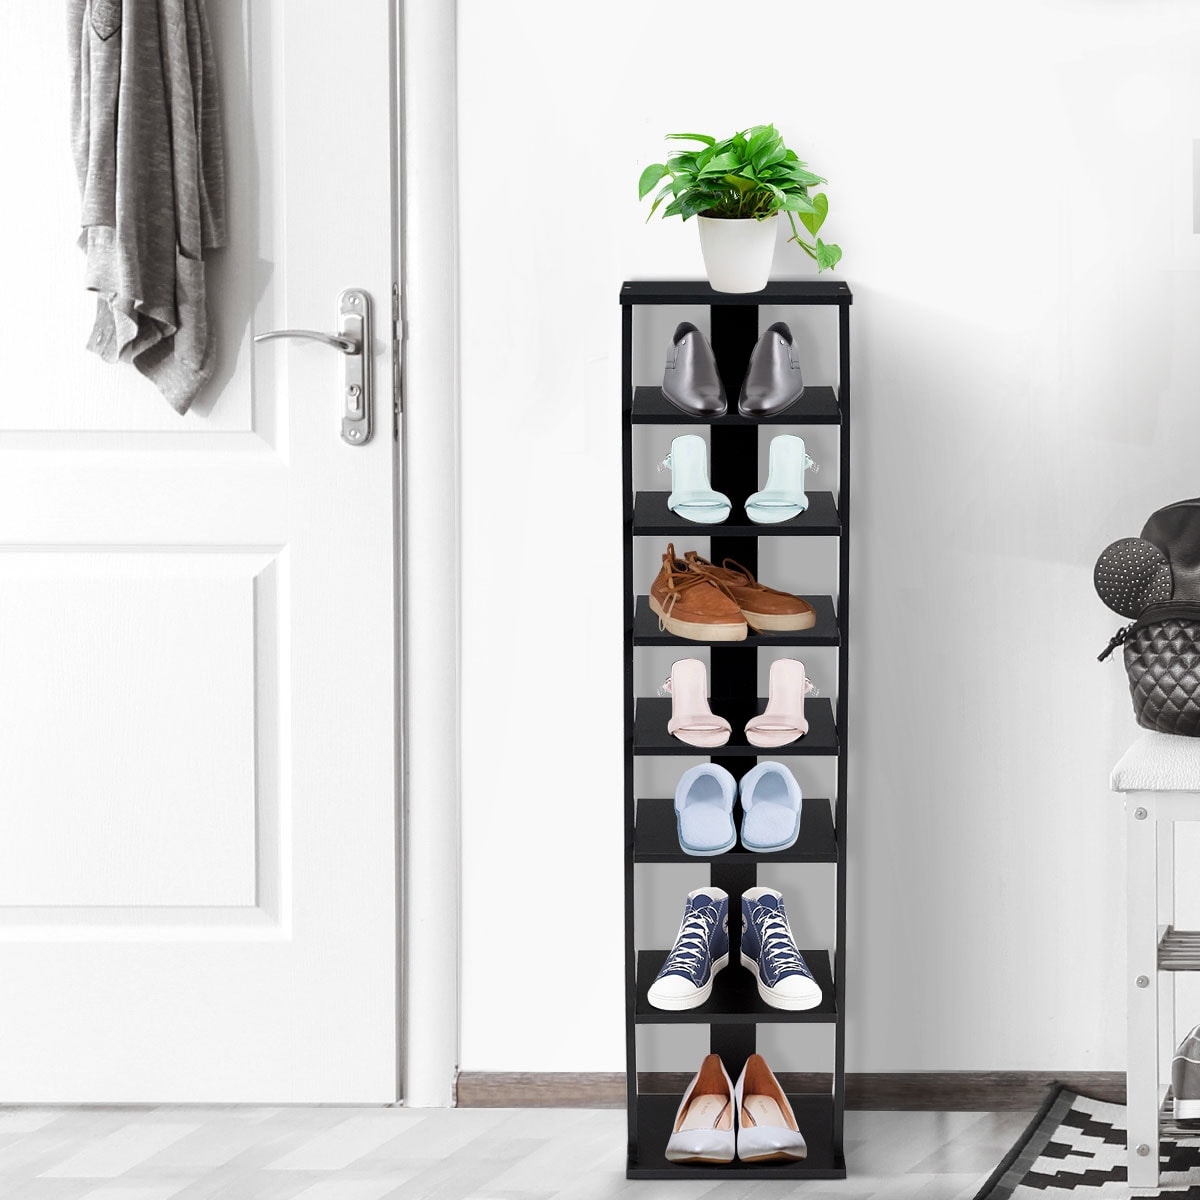 https://ak1.ostkcdn.com/images/products/is/images/direct/f198e2b67e61e1407515ee35b7af148a6a3feb16/7-Tier-Compact-Shoe-Rack-Free-Standing-Storage-Organizer-Shelves.jpg